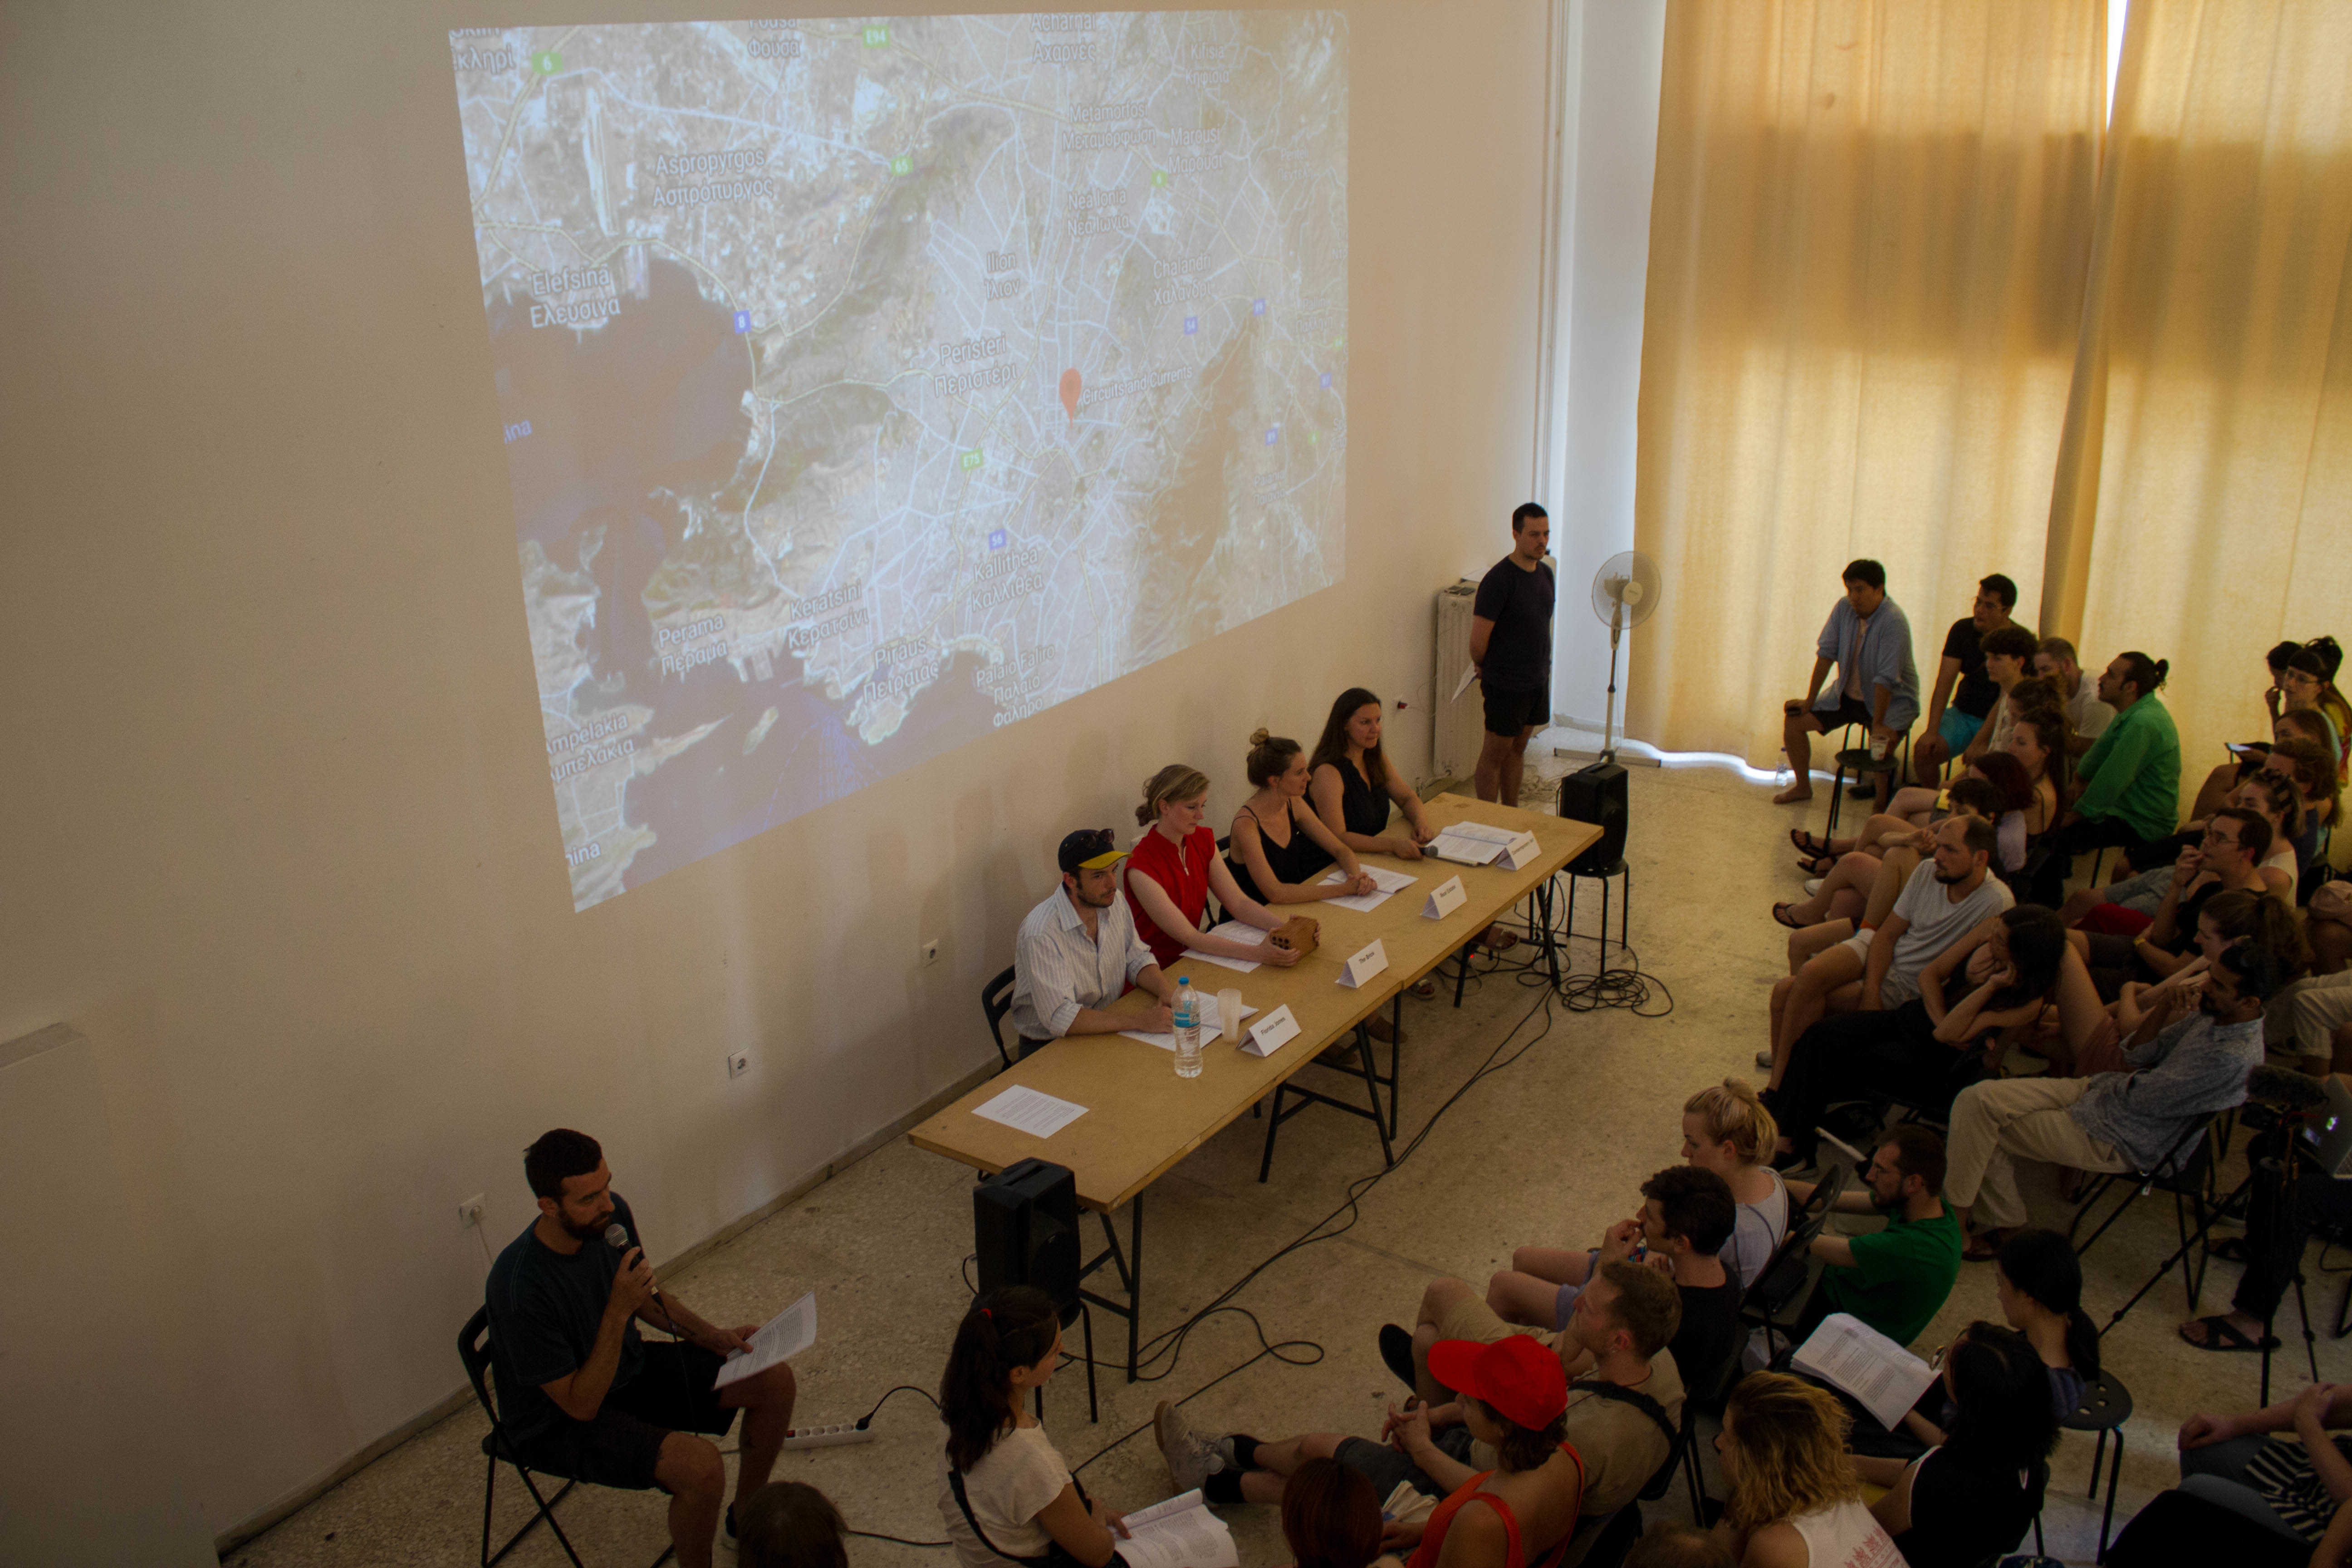 COOP Summit 2018: Presetation by the REALTY study group at the Circuits & Currents Project Space of the Athens School of Fine Arts, on the 2nd of June. Photo: Silvia Ulloa for DAI Roaming Academy.